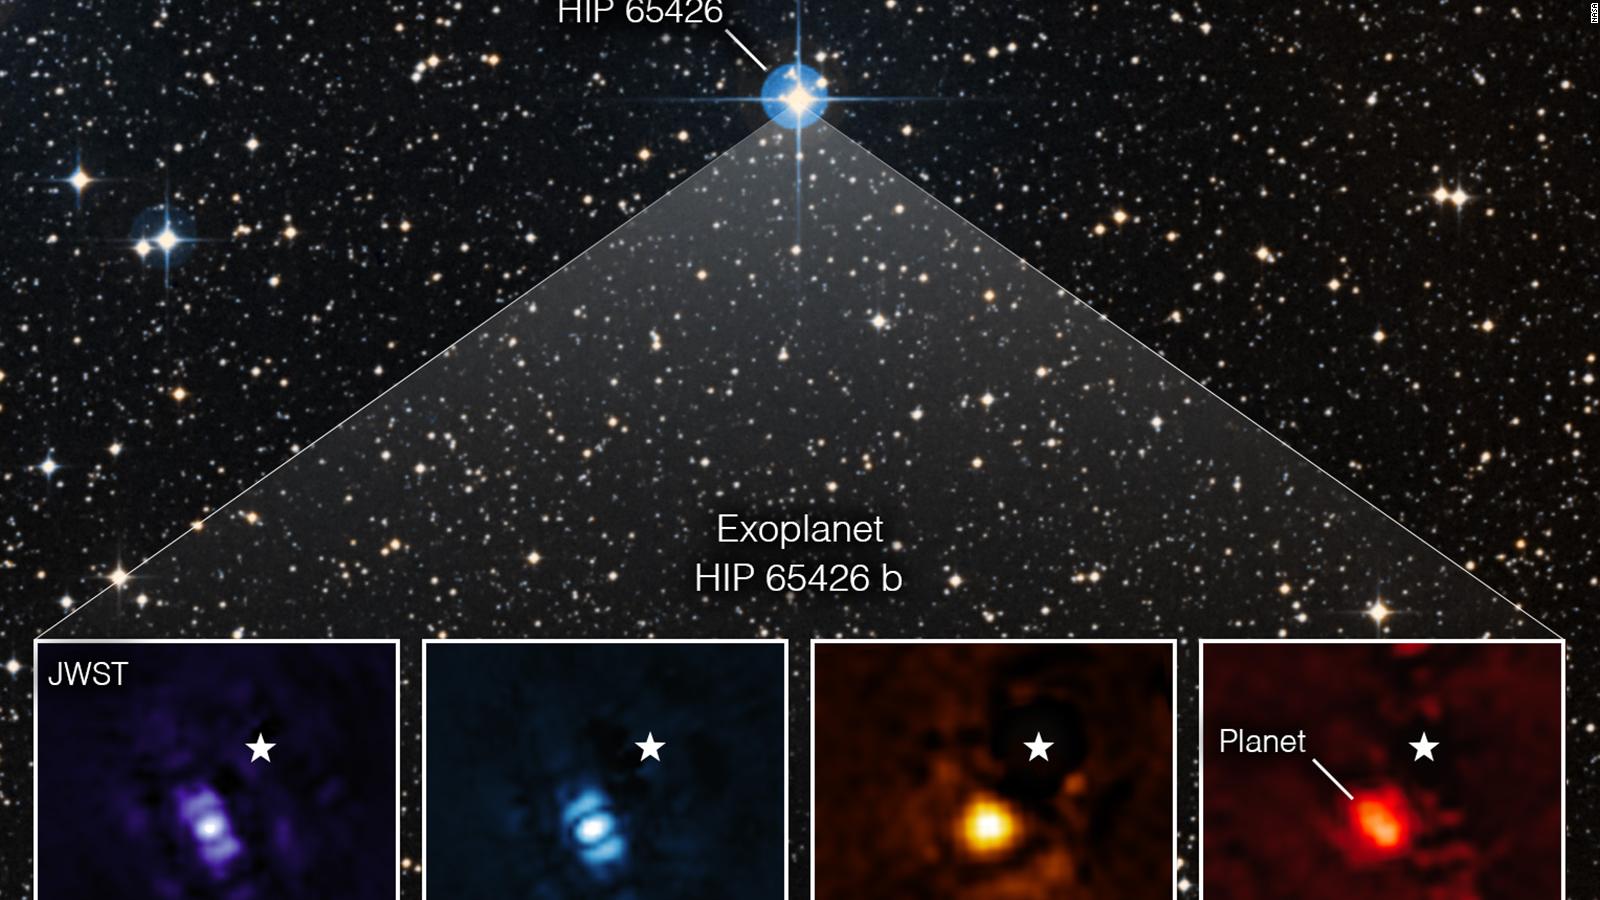 The Webb Telescope captured the first direct image of an exoplanet